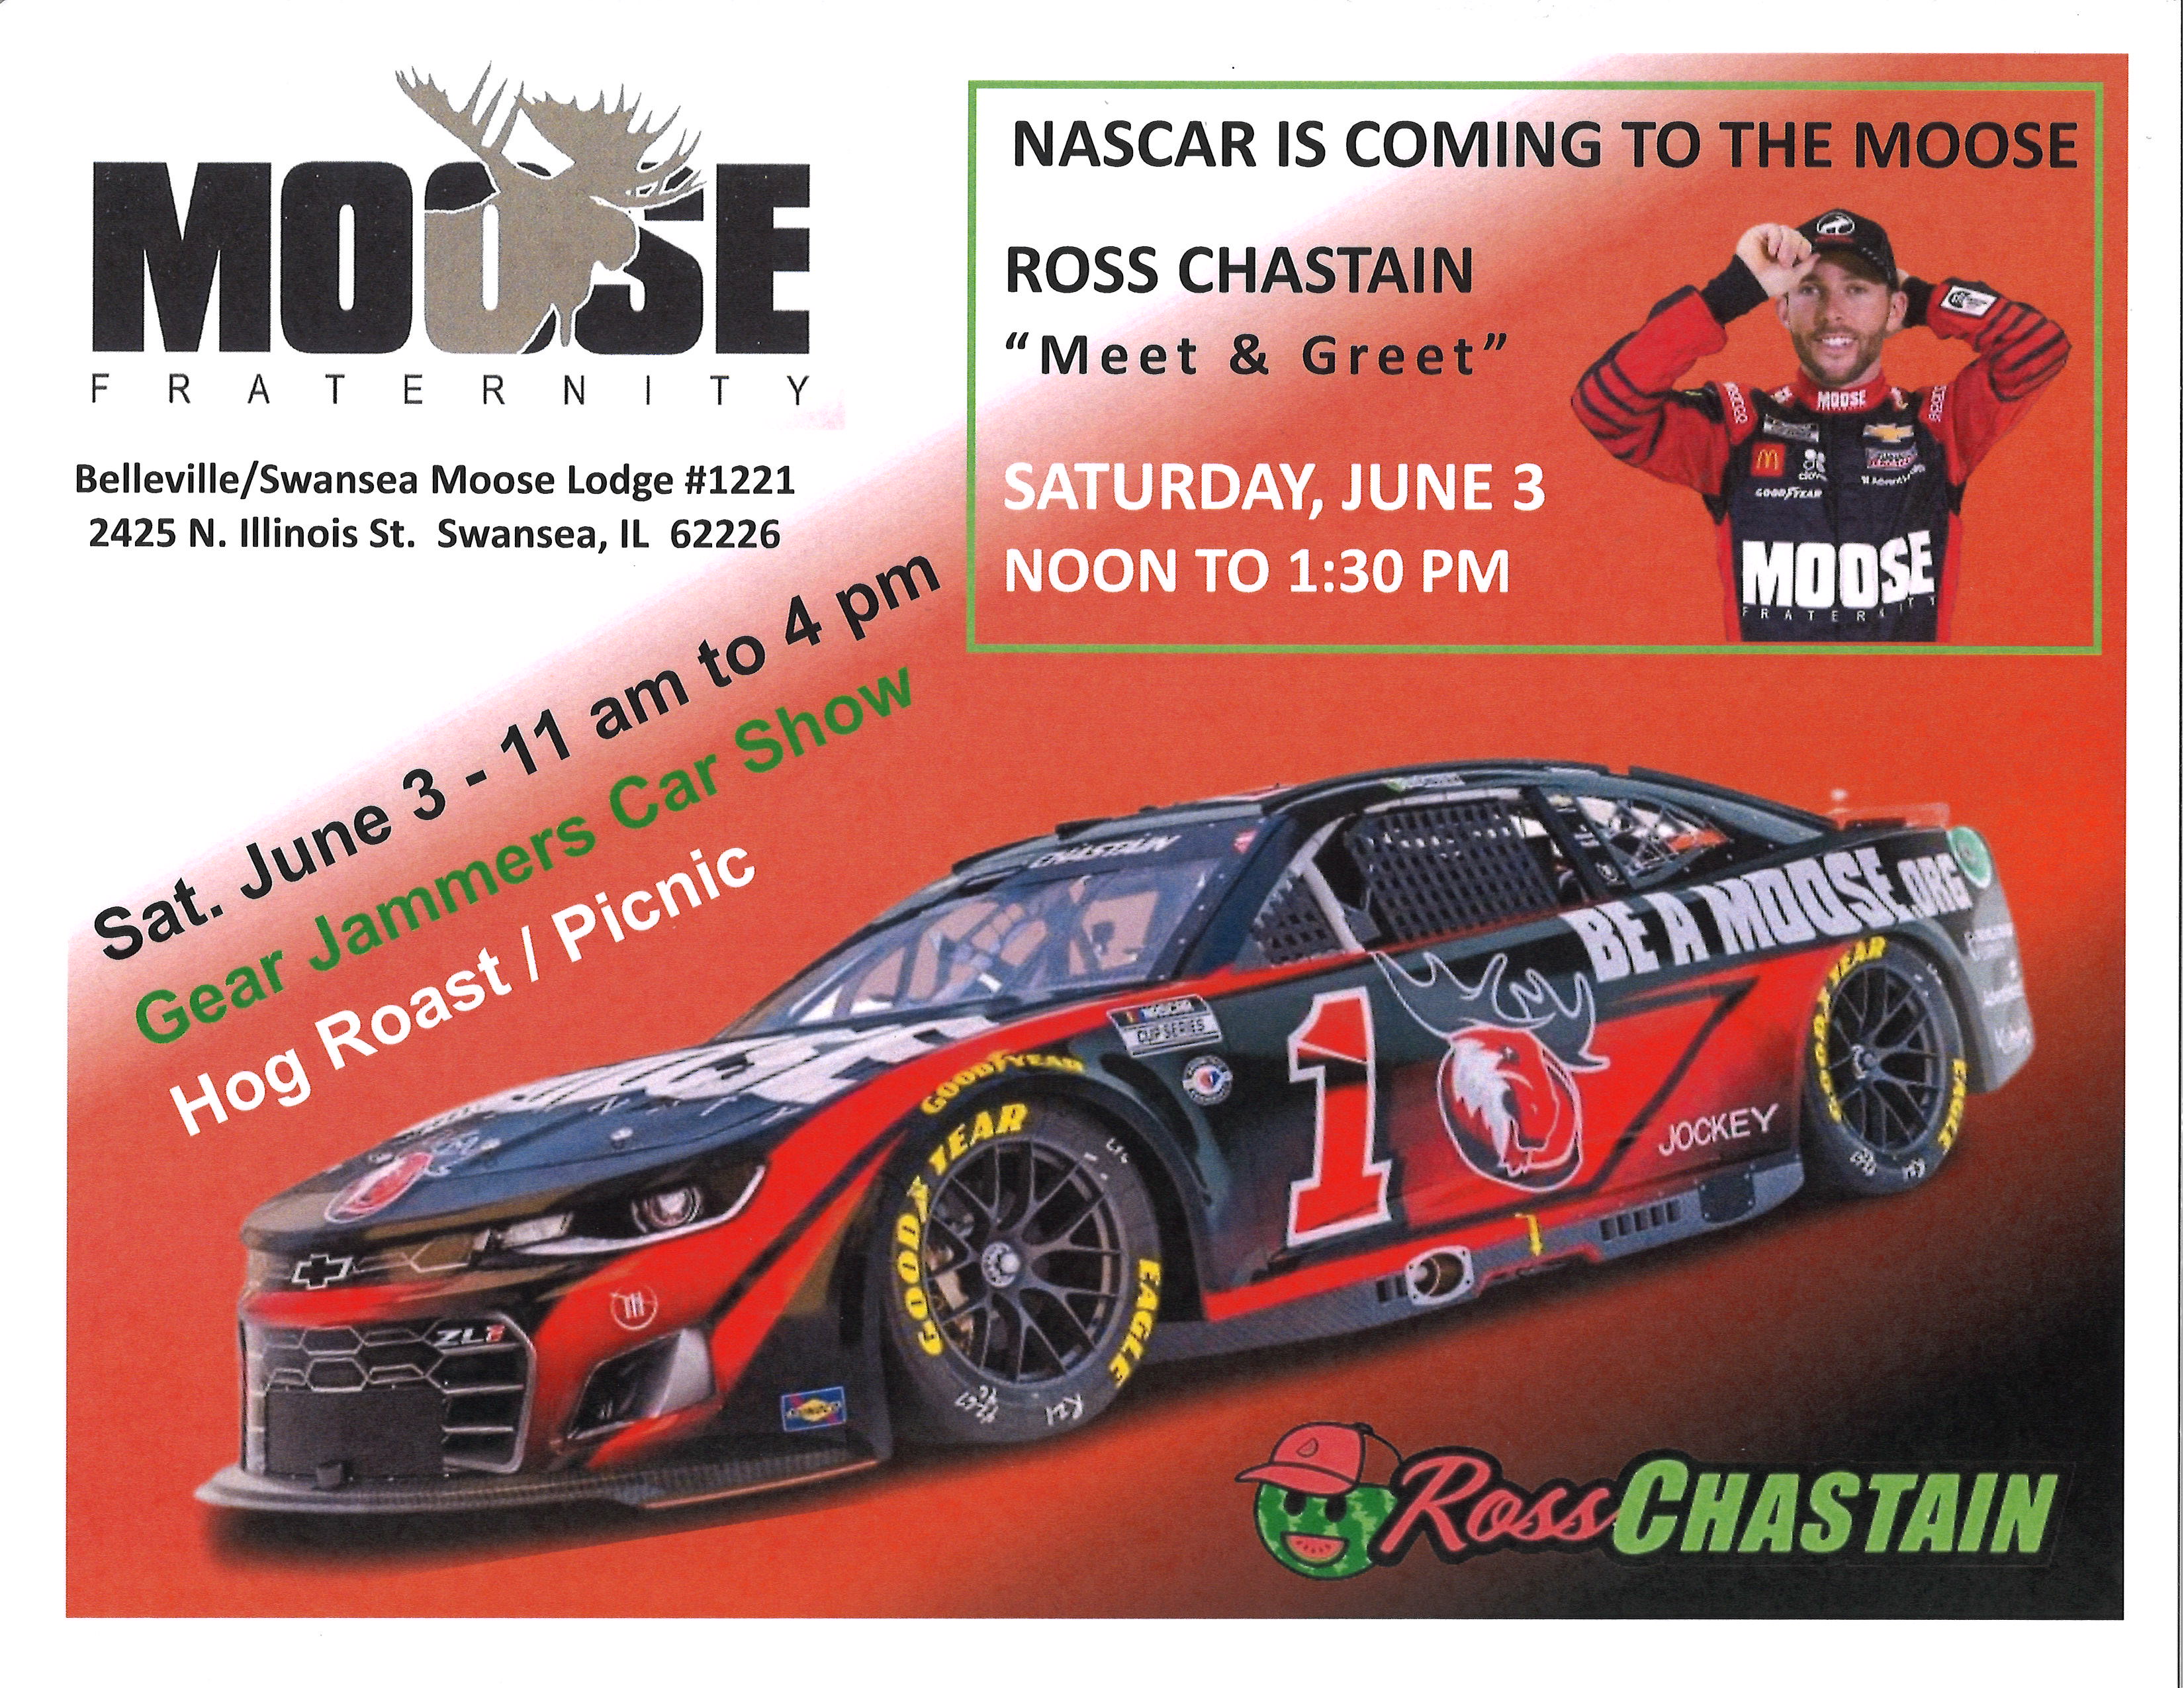 NASCAR IS COMING TO THE MOOSE